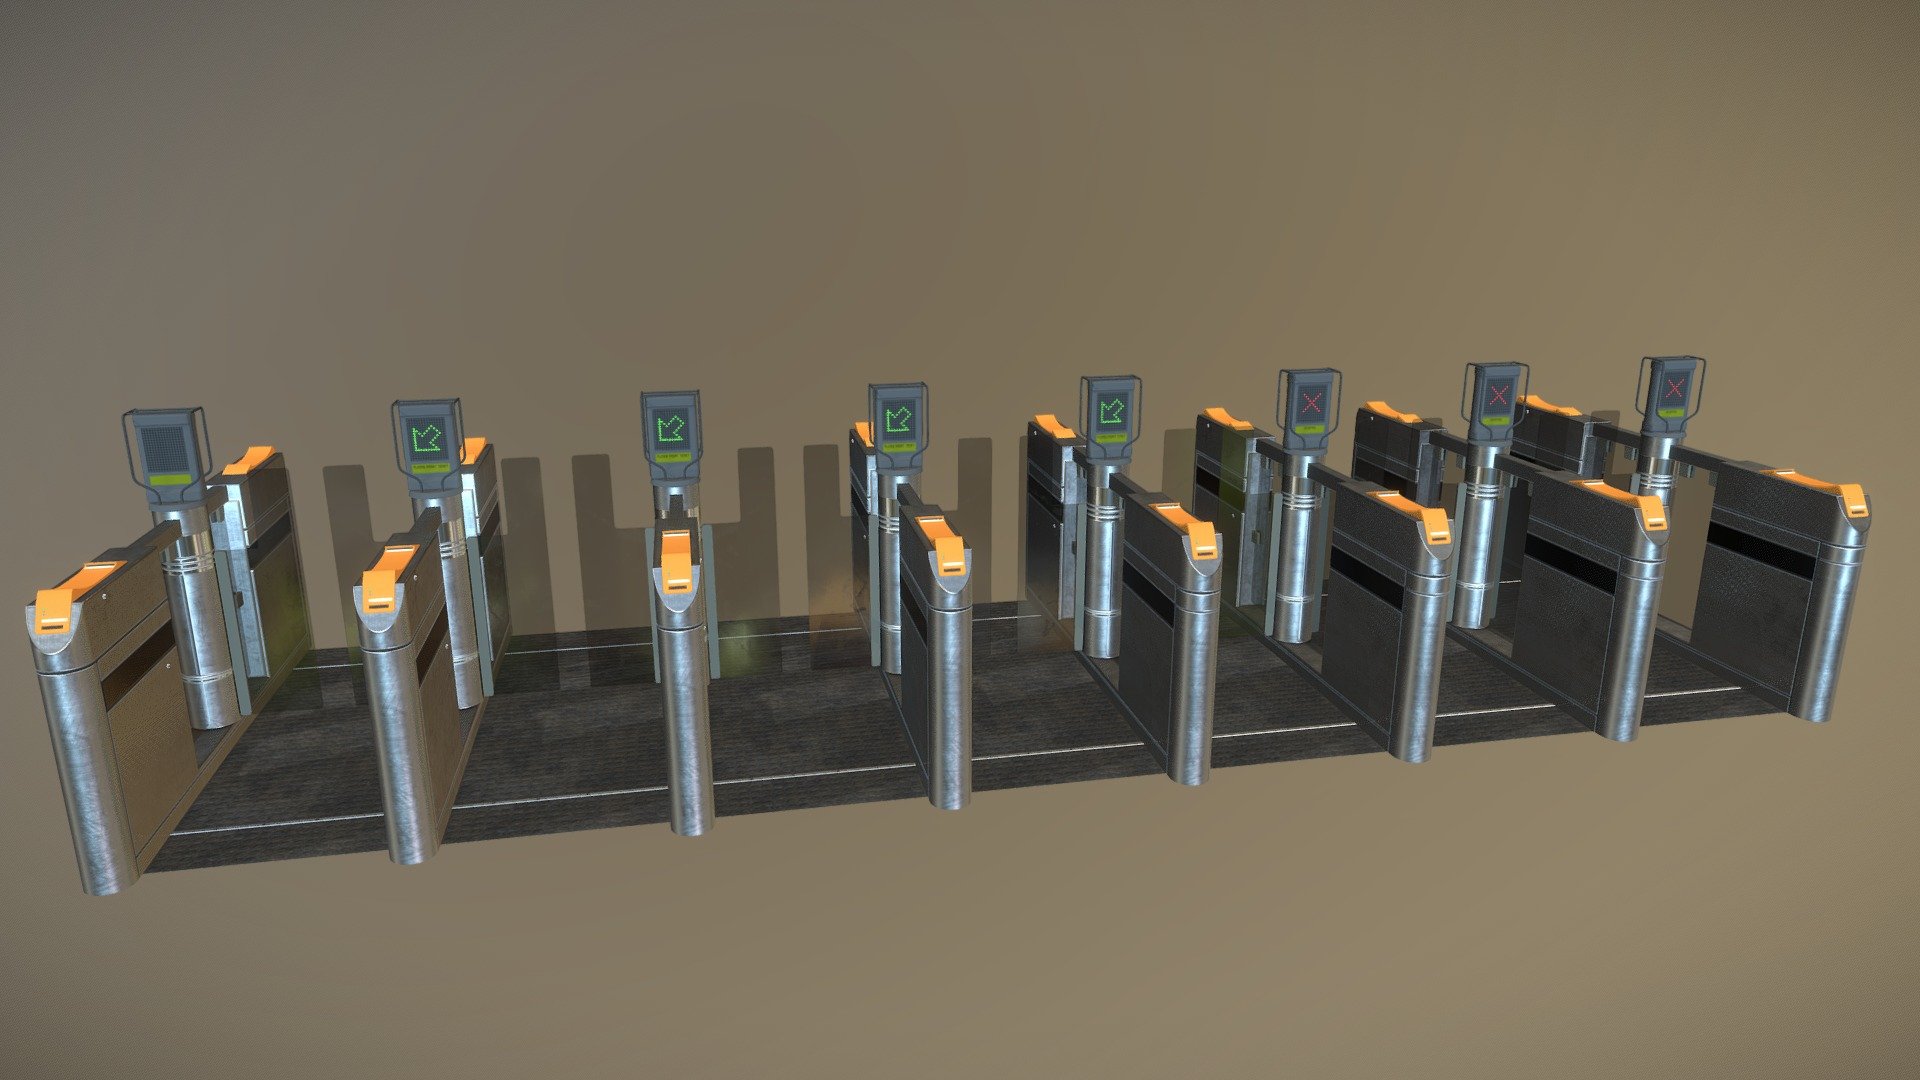 A collection of automated Ticket Barriers. Normally found in and around UK based railway stations.
Game ready mesh and textures for the Ticket Barrier. High quality textures to support PBR/ Physically Based Rendering. For Games and VR projects.
4 meshes total; 3 Ticket barrier variants &amp; respective ground mat.
4k and 2k resolution textures are available. Optimize to your preference.

Available with the set:


4 mesh sets, each with at least 5 textures in .png and .tga format.
Textures for the Ticket Barrier included in .png and .tga format: Albedo, Normal, Metallic, Roughness, Ambient Occlusion, Emissive
Optimized for Game Engines, such as Unreal 4 and Unity
Meshes complete with separate mesh elements, ready to be rigged and animated
Fully UV unwrapped with no overlaps
Geometry at 3000 Polygons, 6362 Tris, 3554 Verts for the Ticket Barrier #1
Geometry at 2931 Polygons, 6190 Tris, 3456 Verts for the Ticket Barrier #2 &amp; #3
Geometry at 10 Polygons, 20 Tris, 26 Verts for the Barrier Mat
 - Ticket Barrier Set - Buy Royalty Free 3D model by BR industries (@betarazer) 3d model